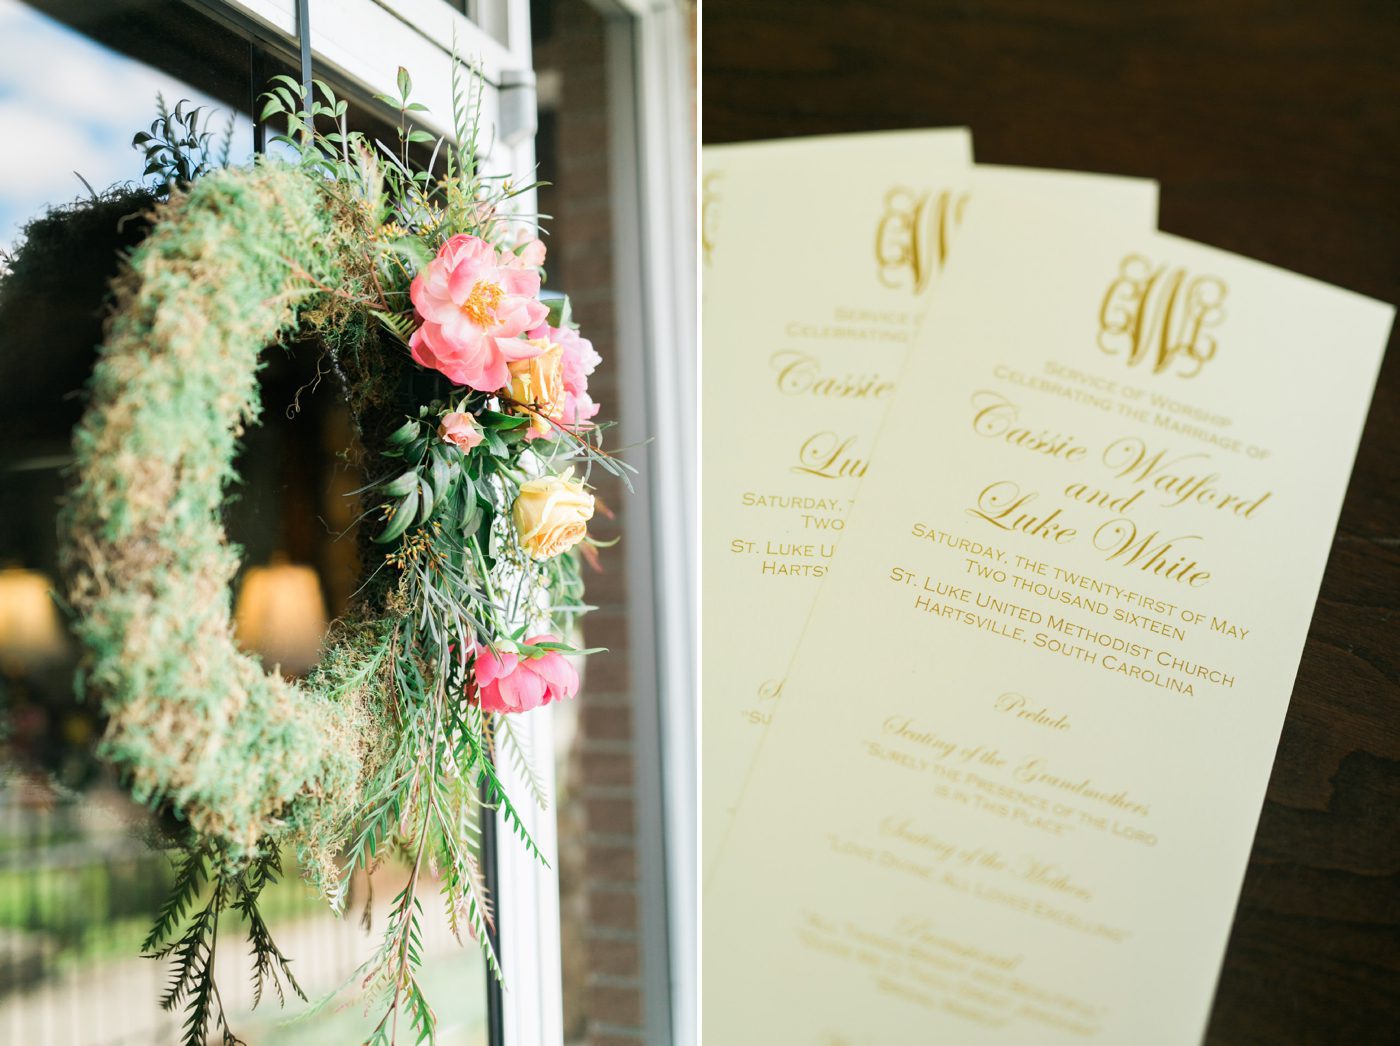 Southern wedding decor inspiration with flowers and monogram programs. Photo by Charleston wedding photographer Catherine Ann Photography